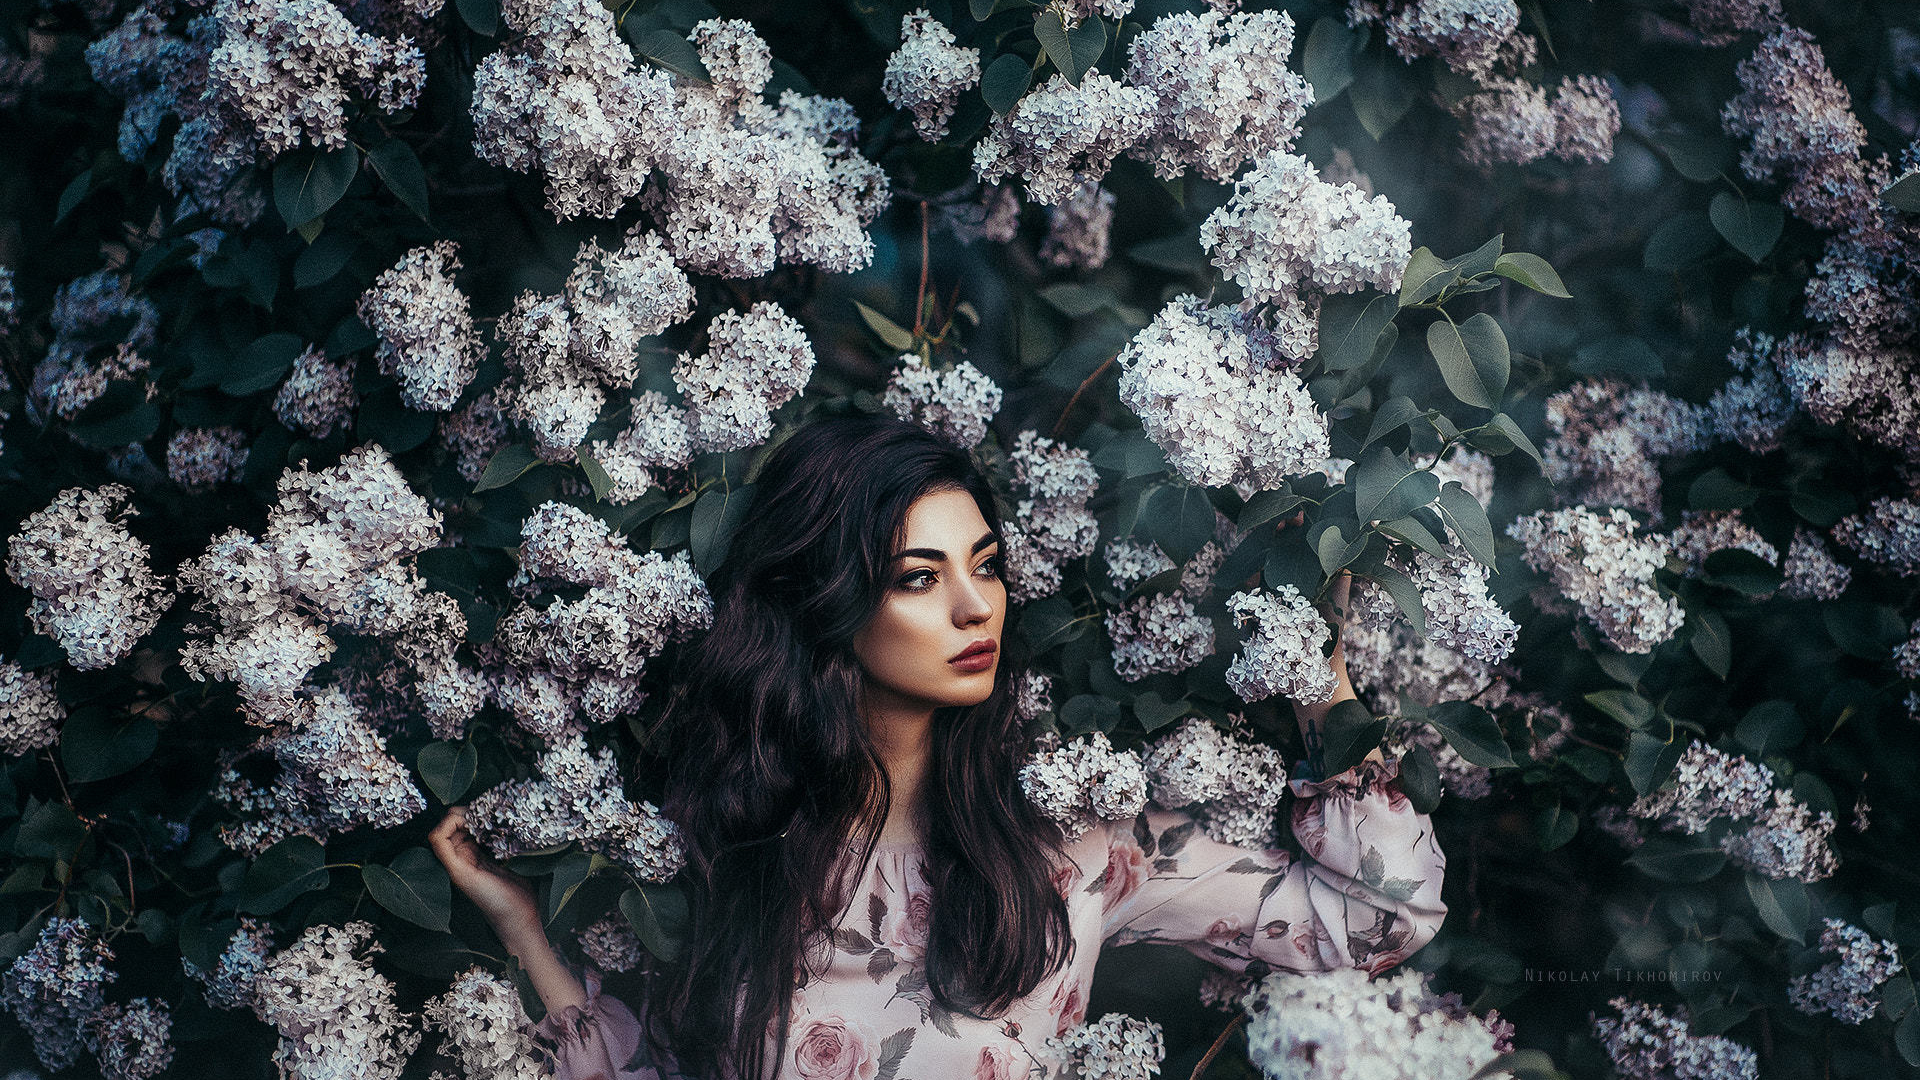 Download wallpaper 1920x1080 flowers and woman, photoshoot, full hd, hdtv,  fhd, 1080p wallpaper, 1920x1080 hd background, 8376